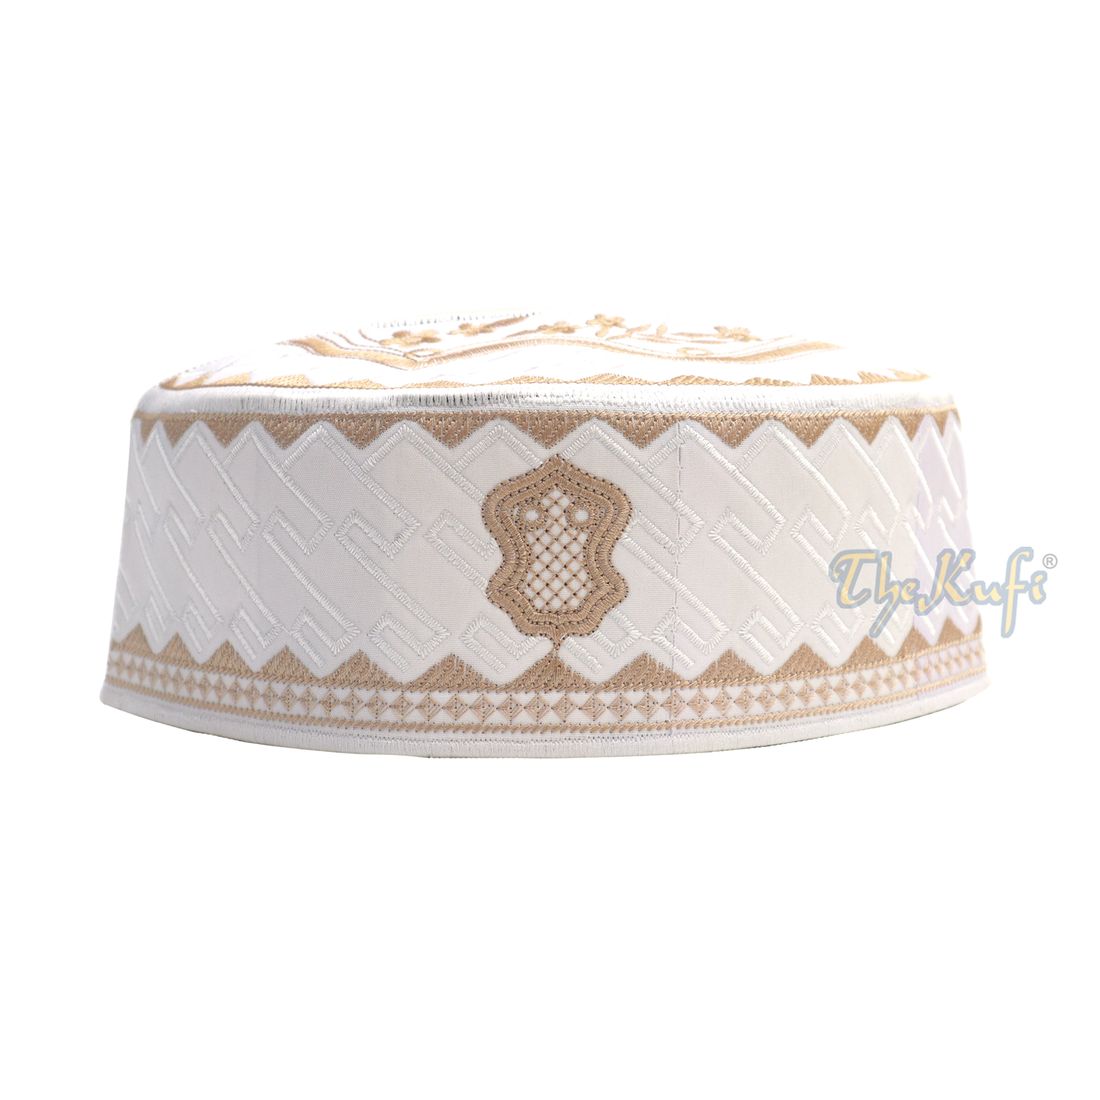 Textured White and Light Brown Embroidered Sandal Kufi Hat